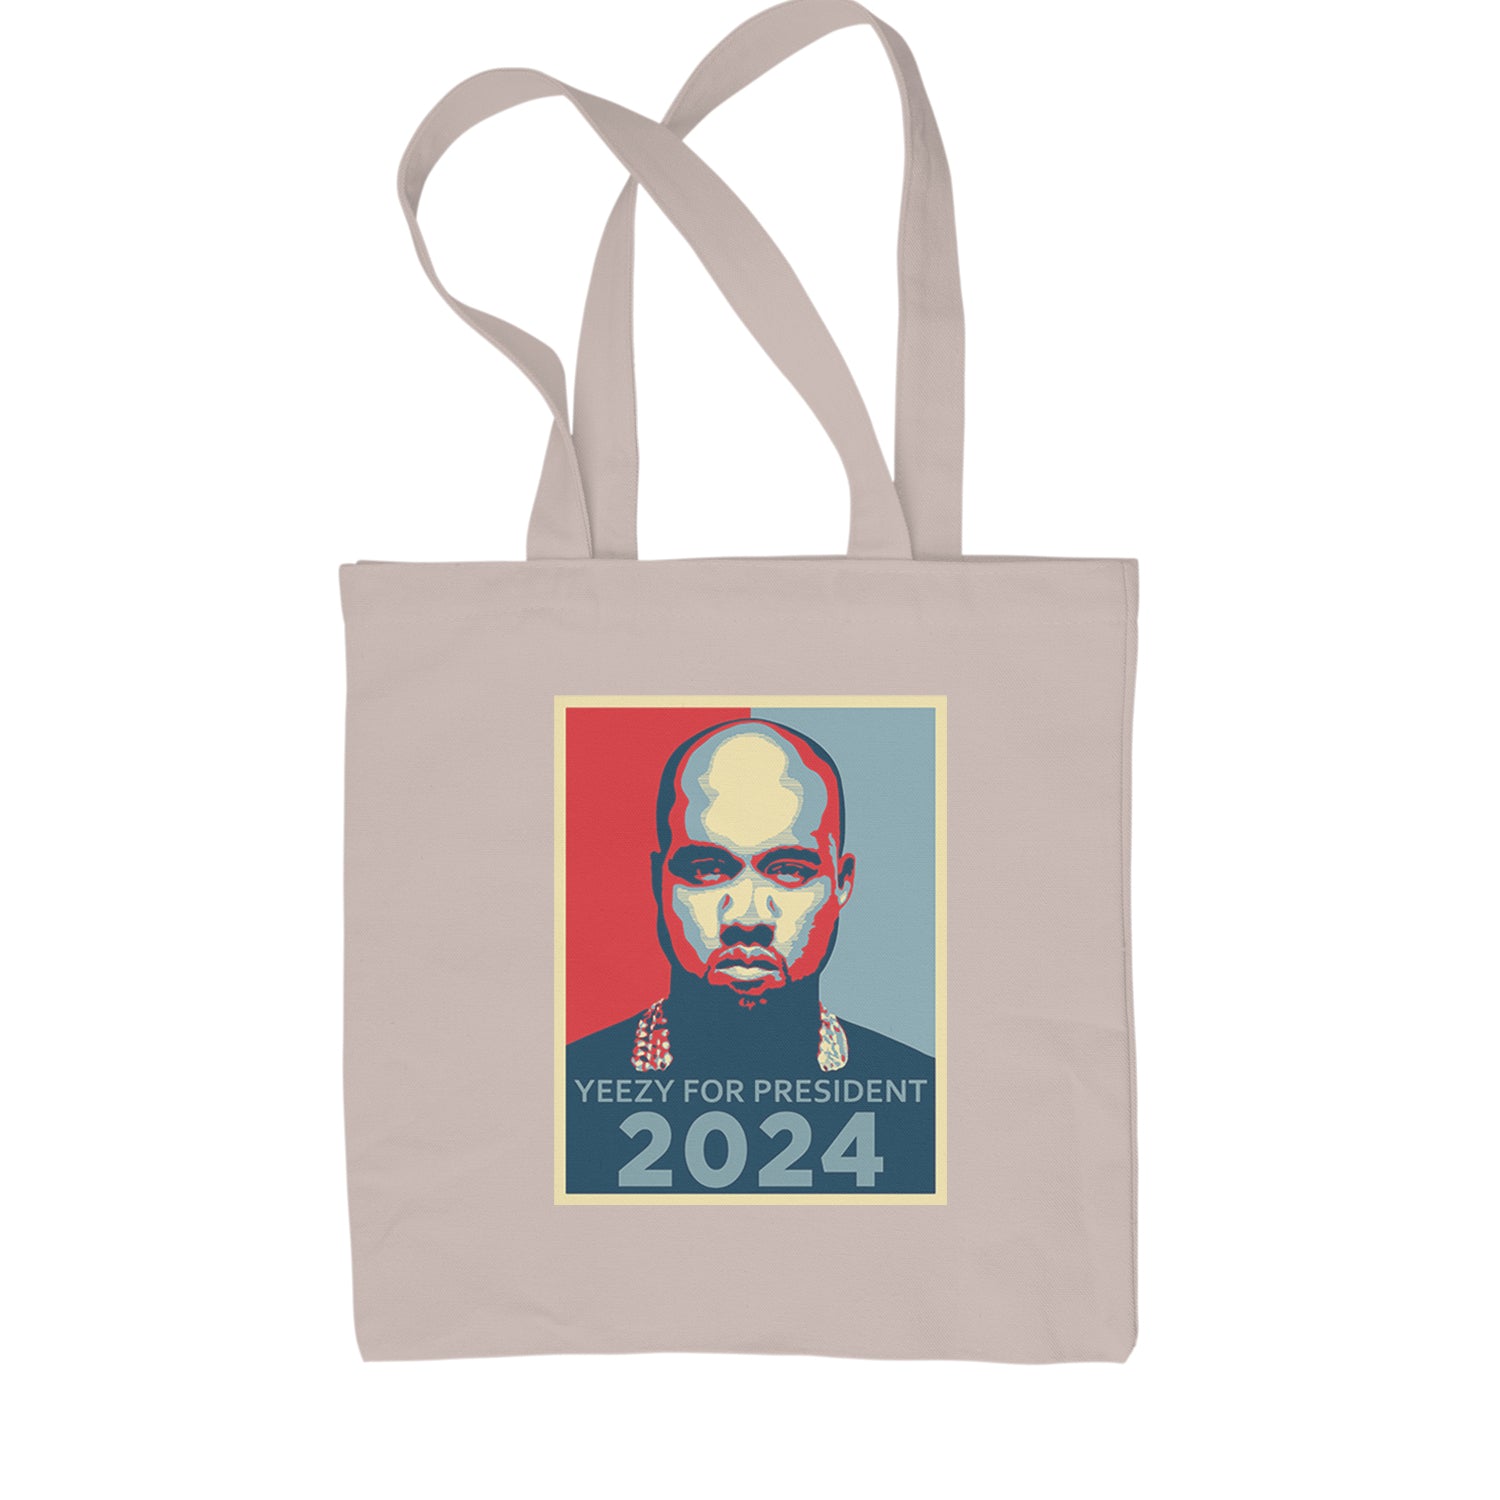 Yeezus For President Vote for Ye Shopping Tote Bag Natural